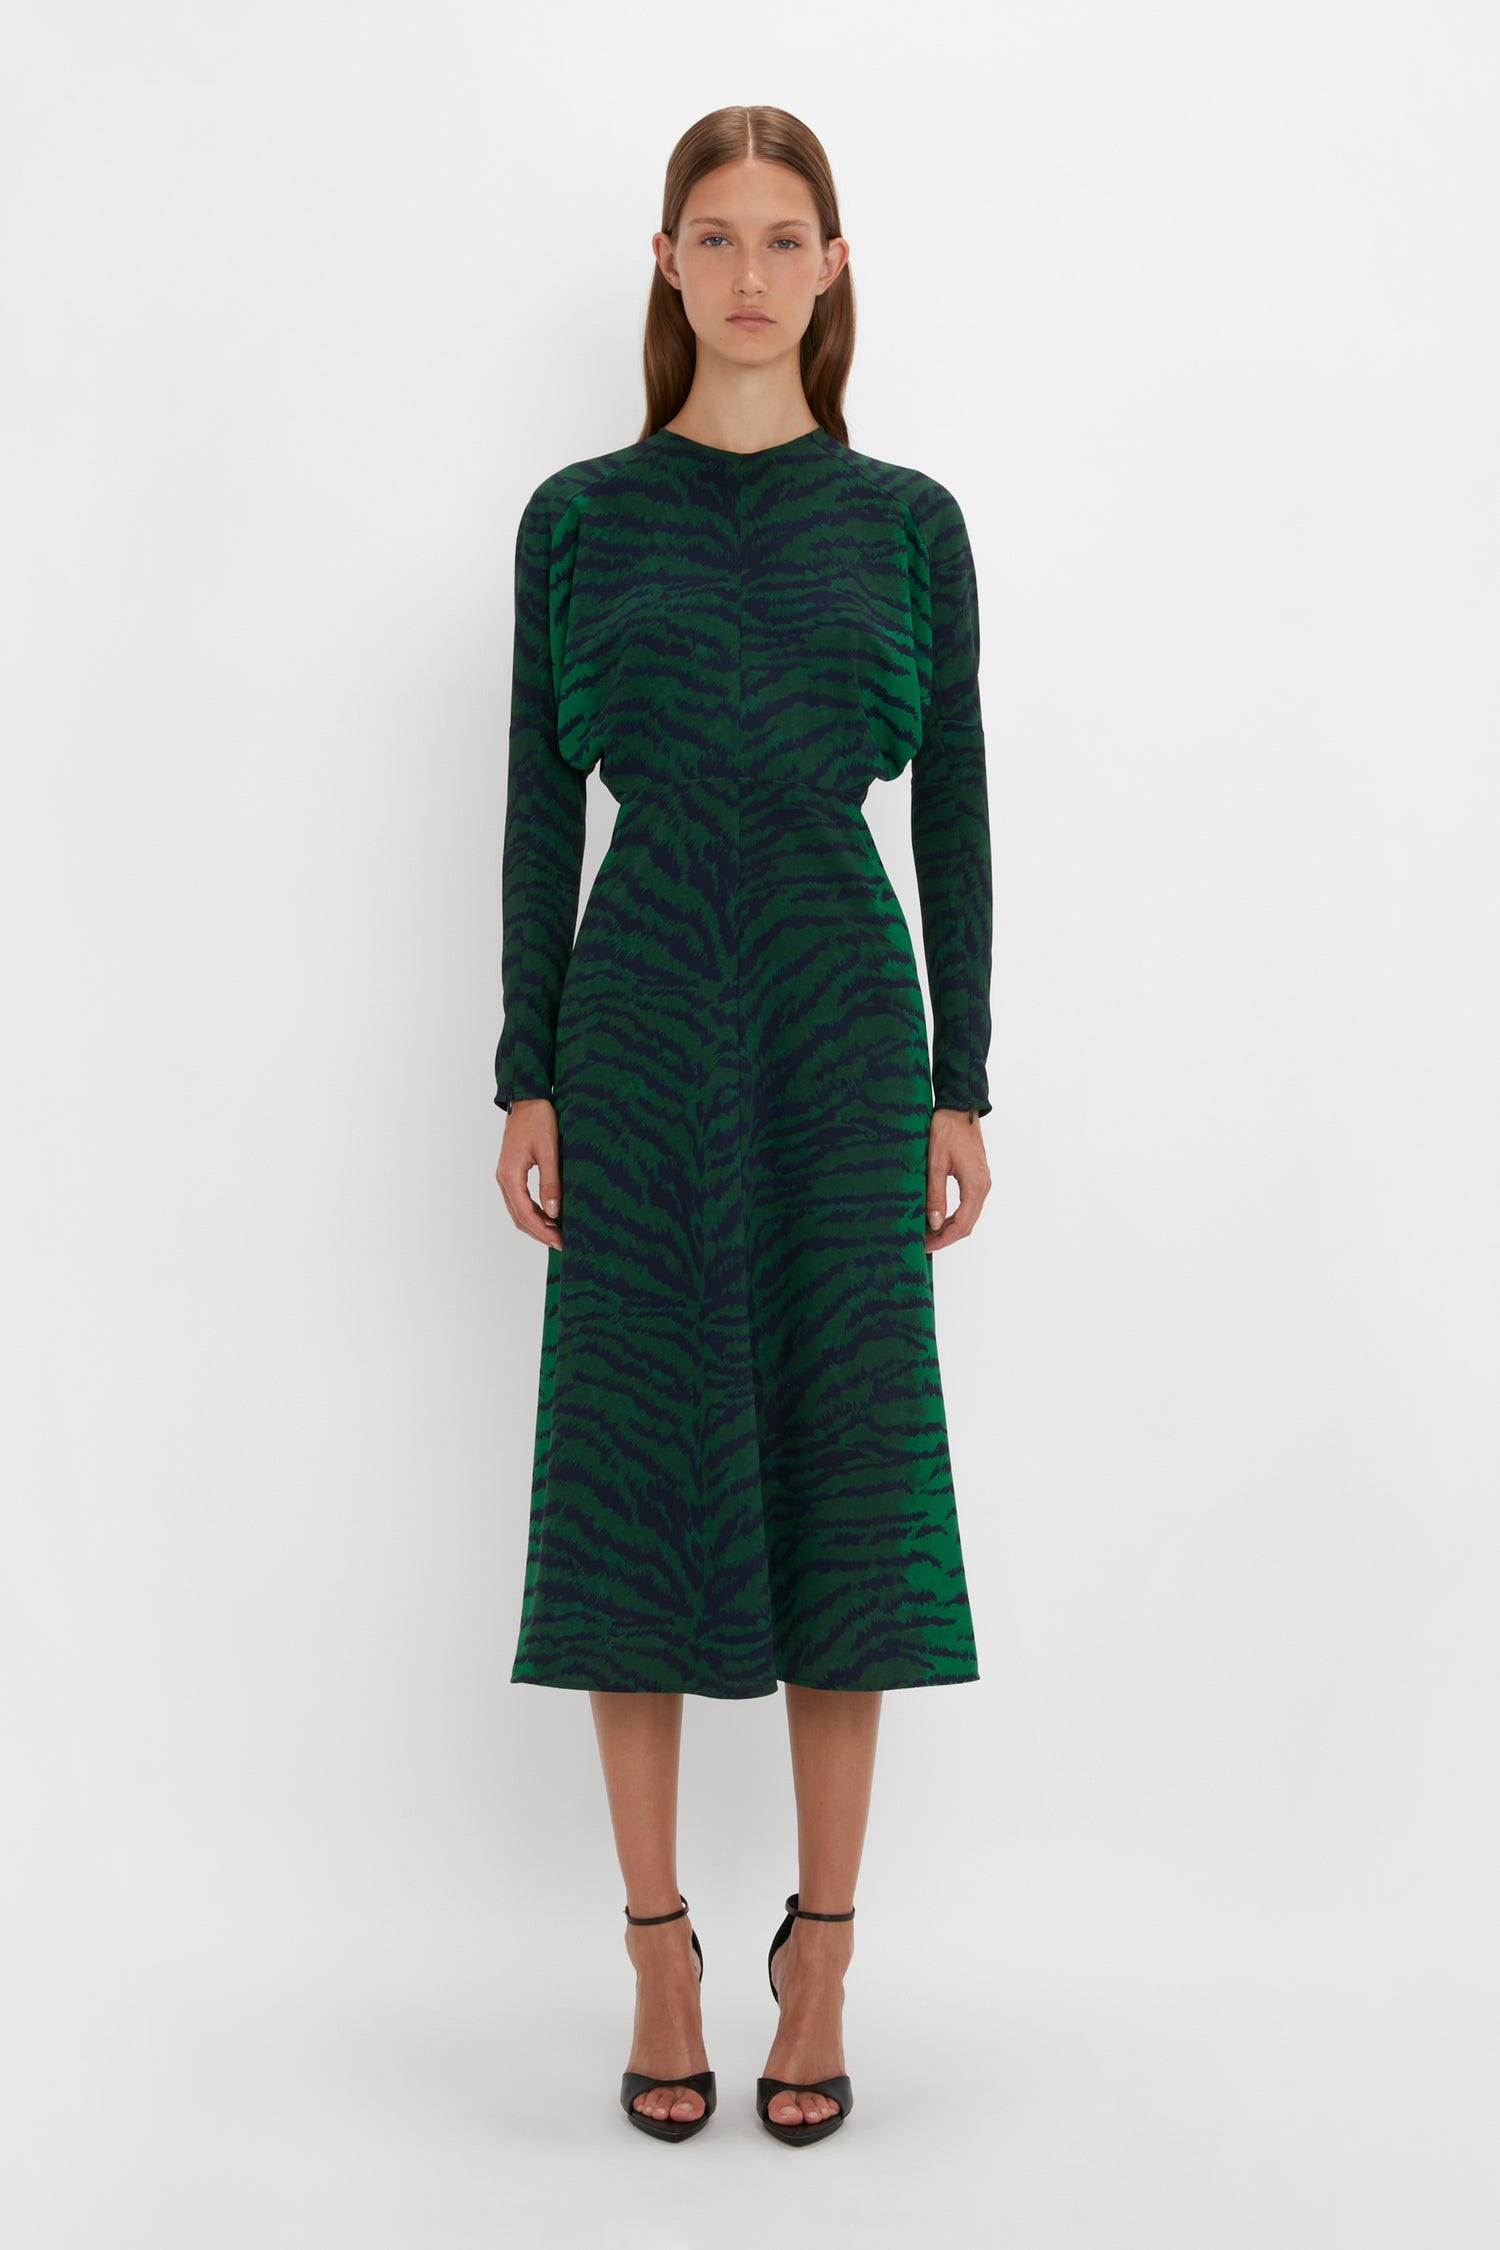 A woman in a Victoria Beckham green-navy tiger print dolman midi dress standing against a white background.